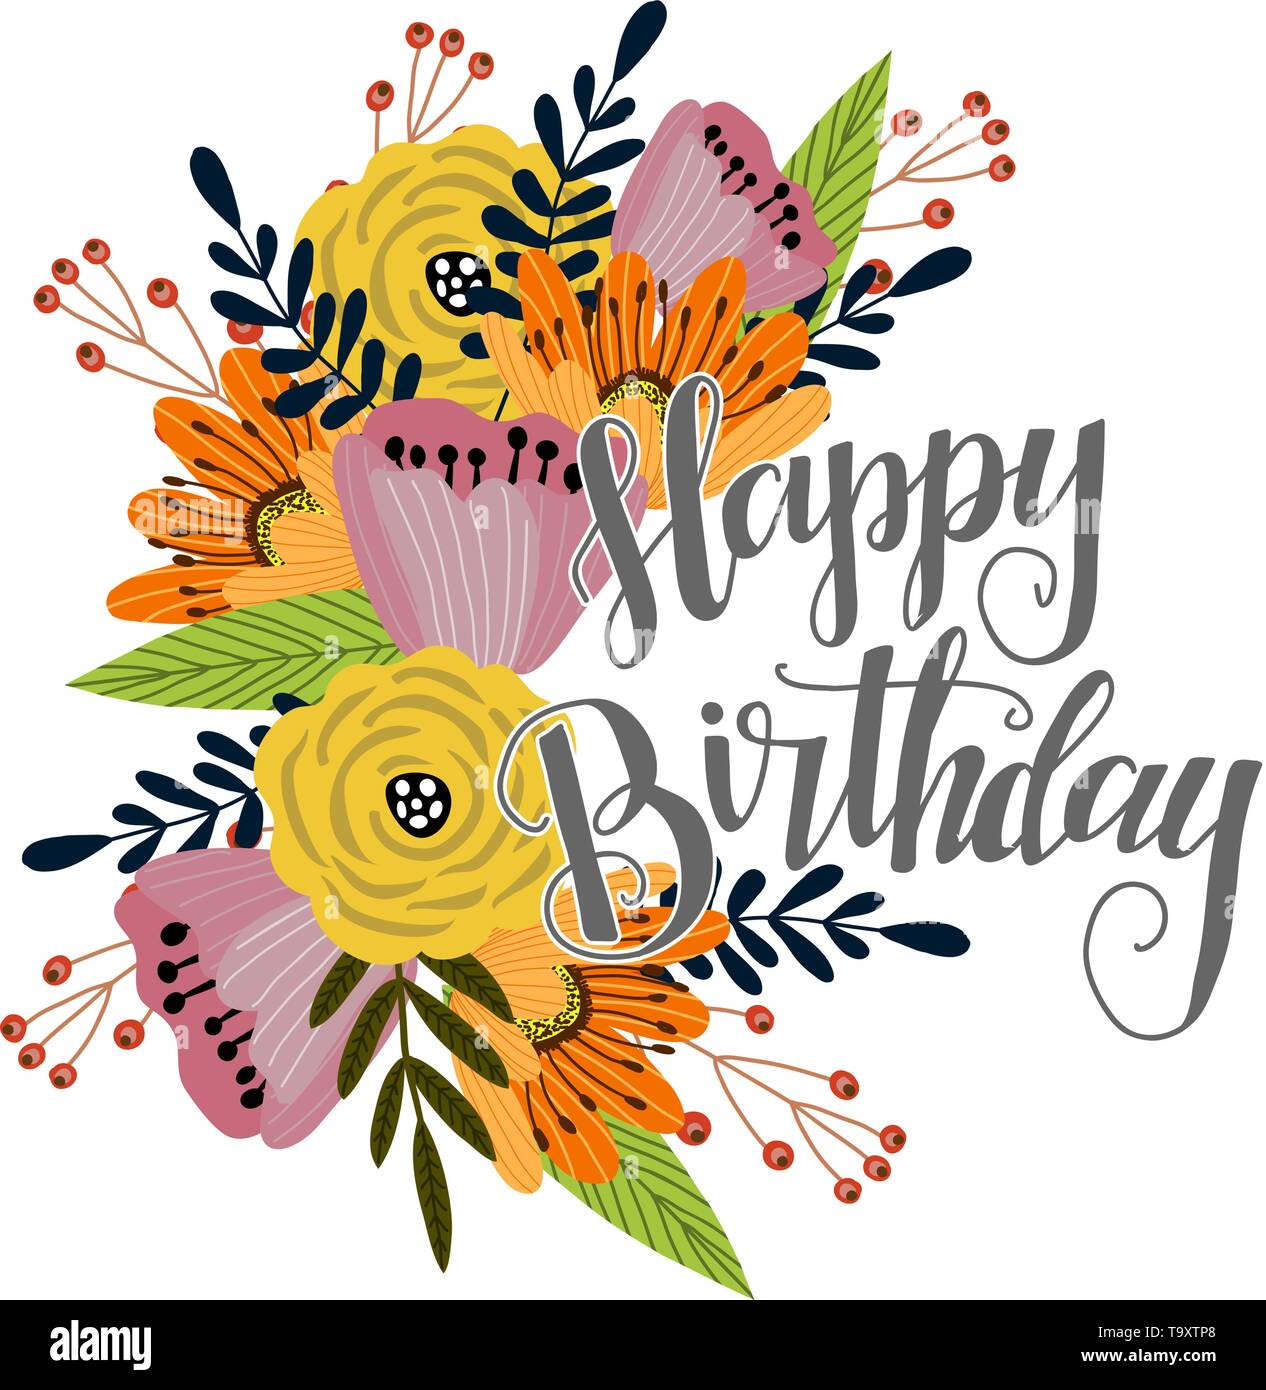 Happy birthday. Template for cards and banners with cute doodles ...